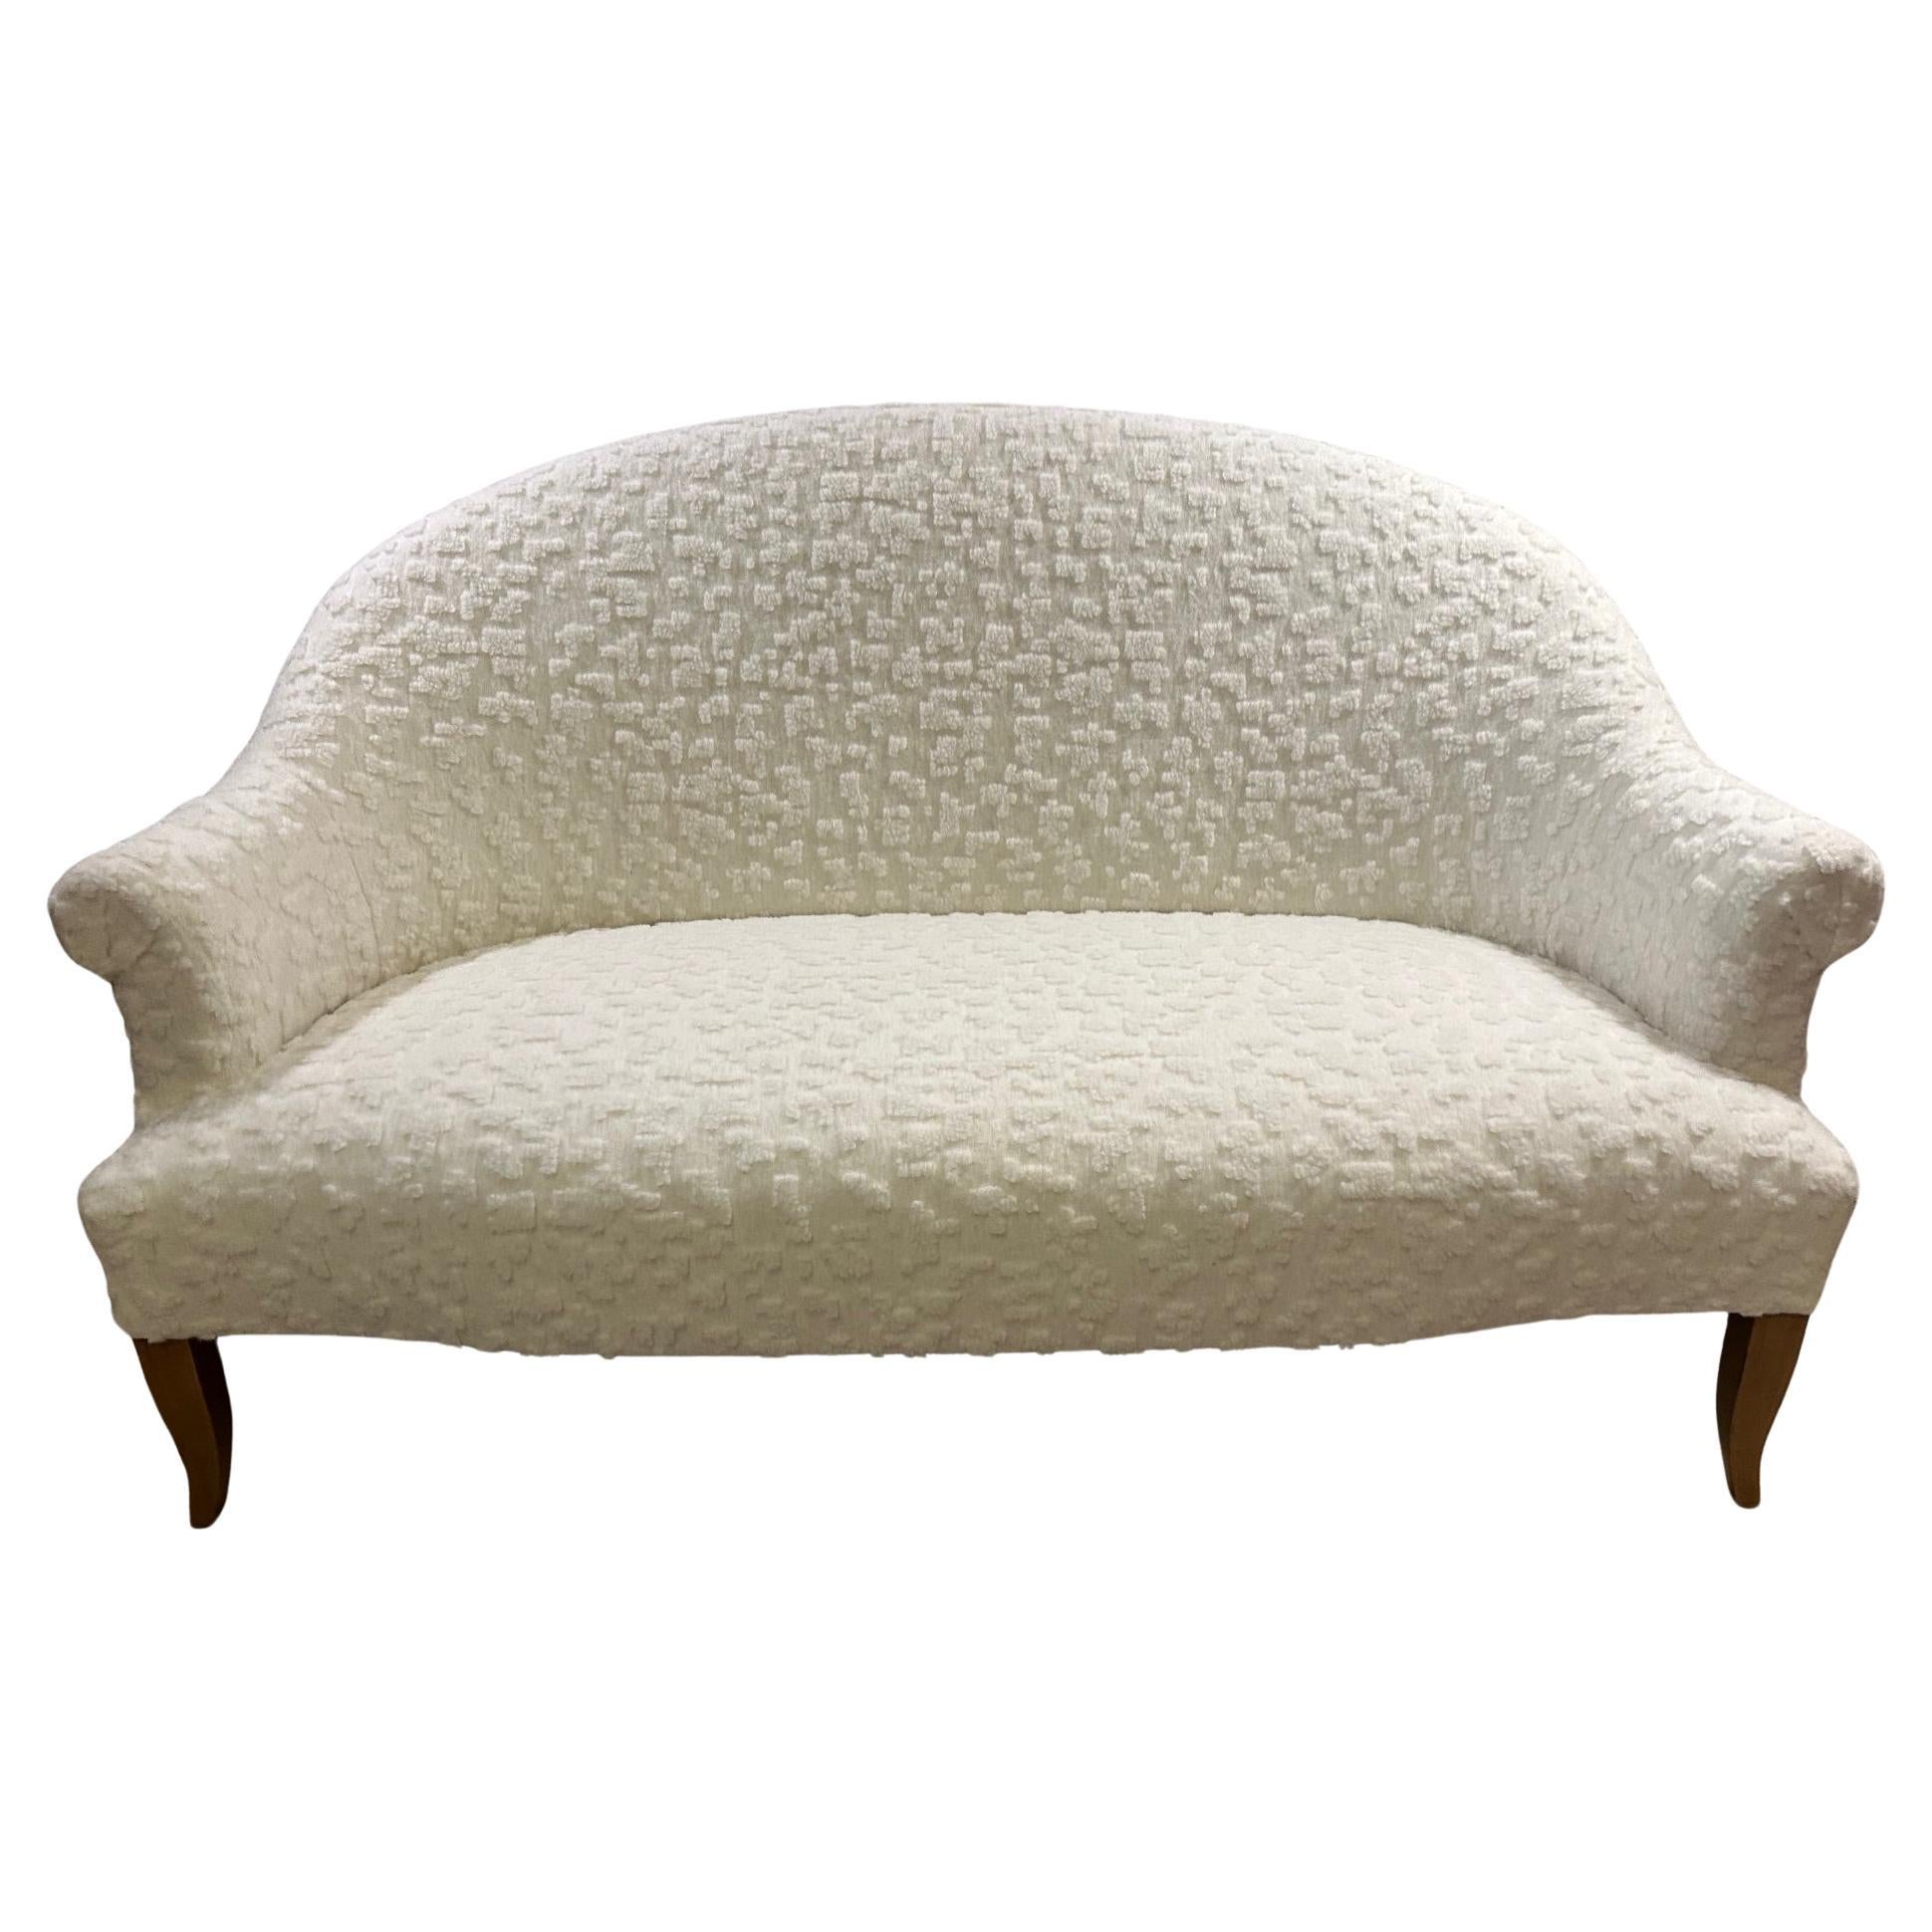 20th century French Upholstered Crapaud Sofa, 1960s